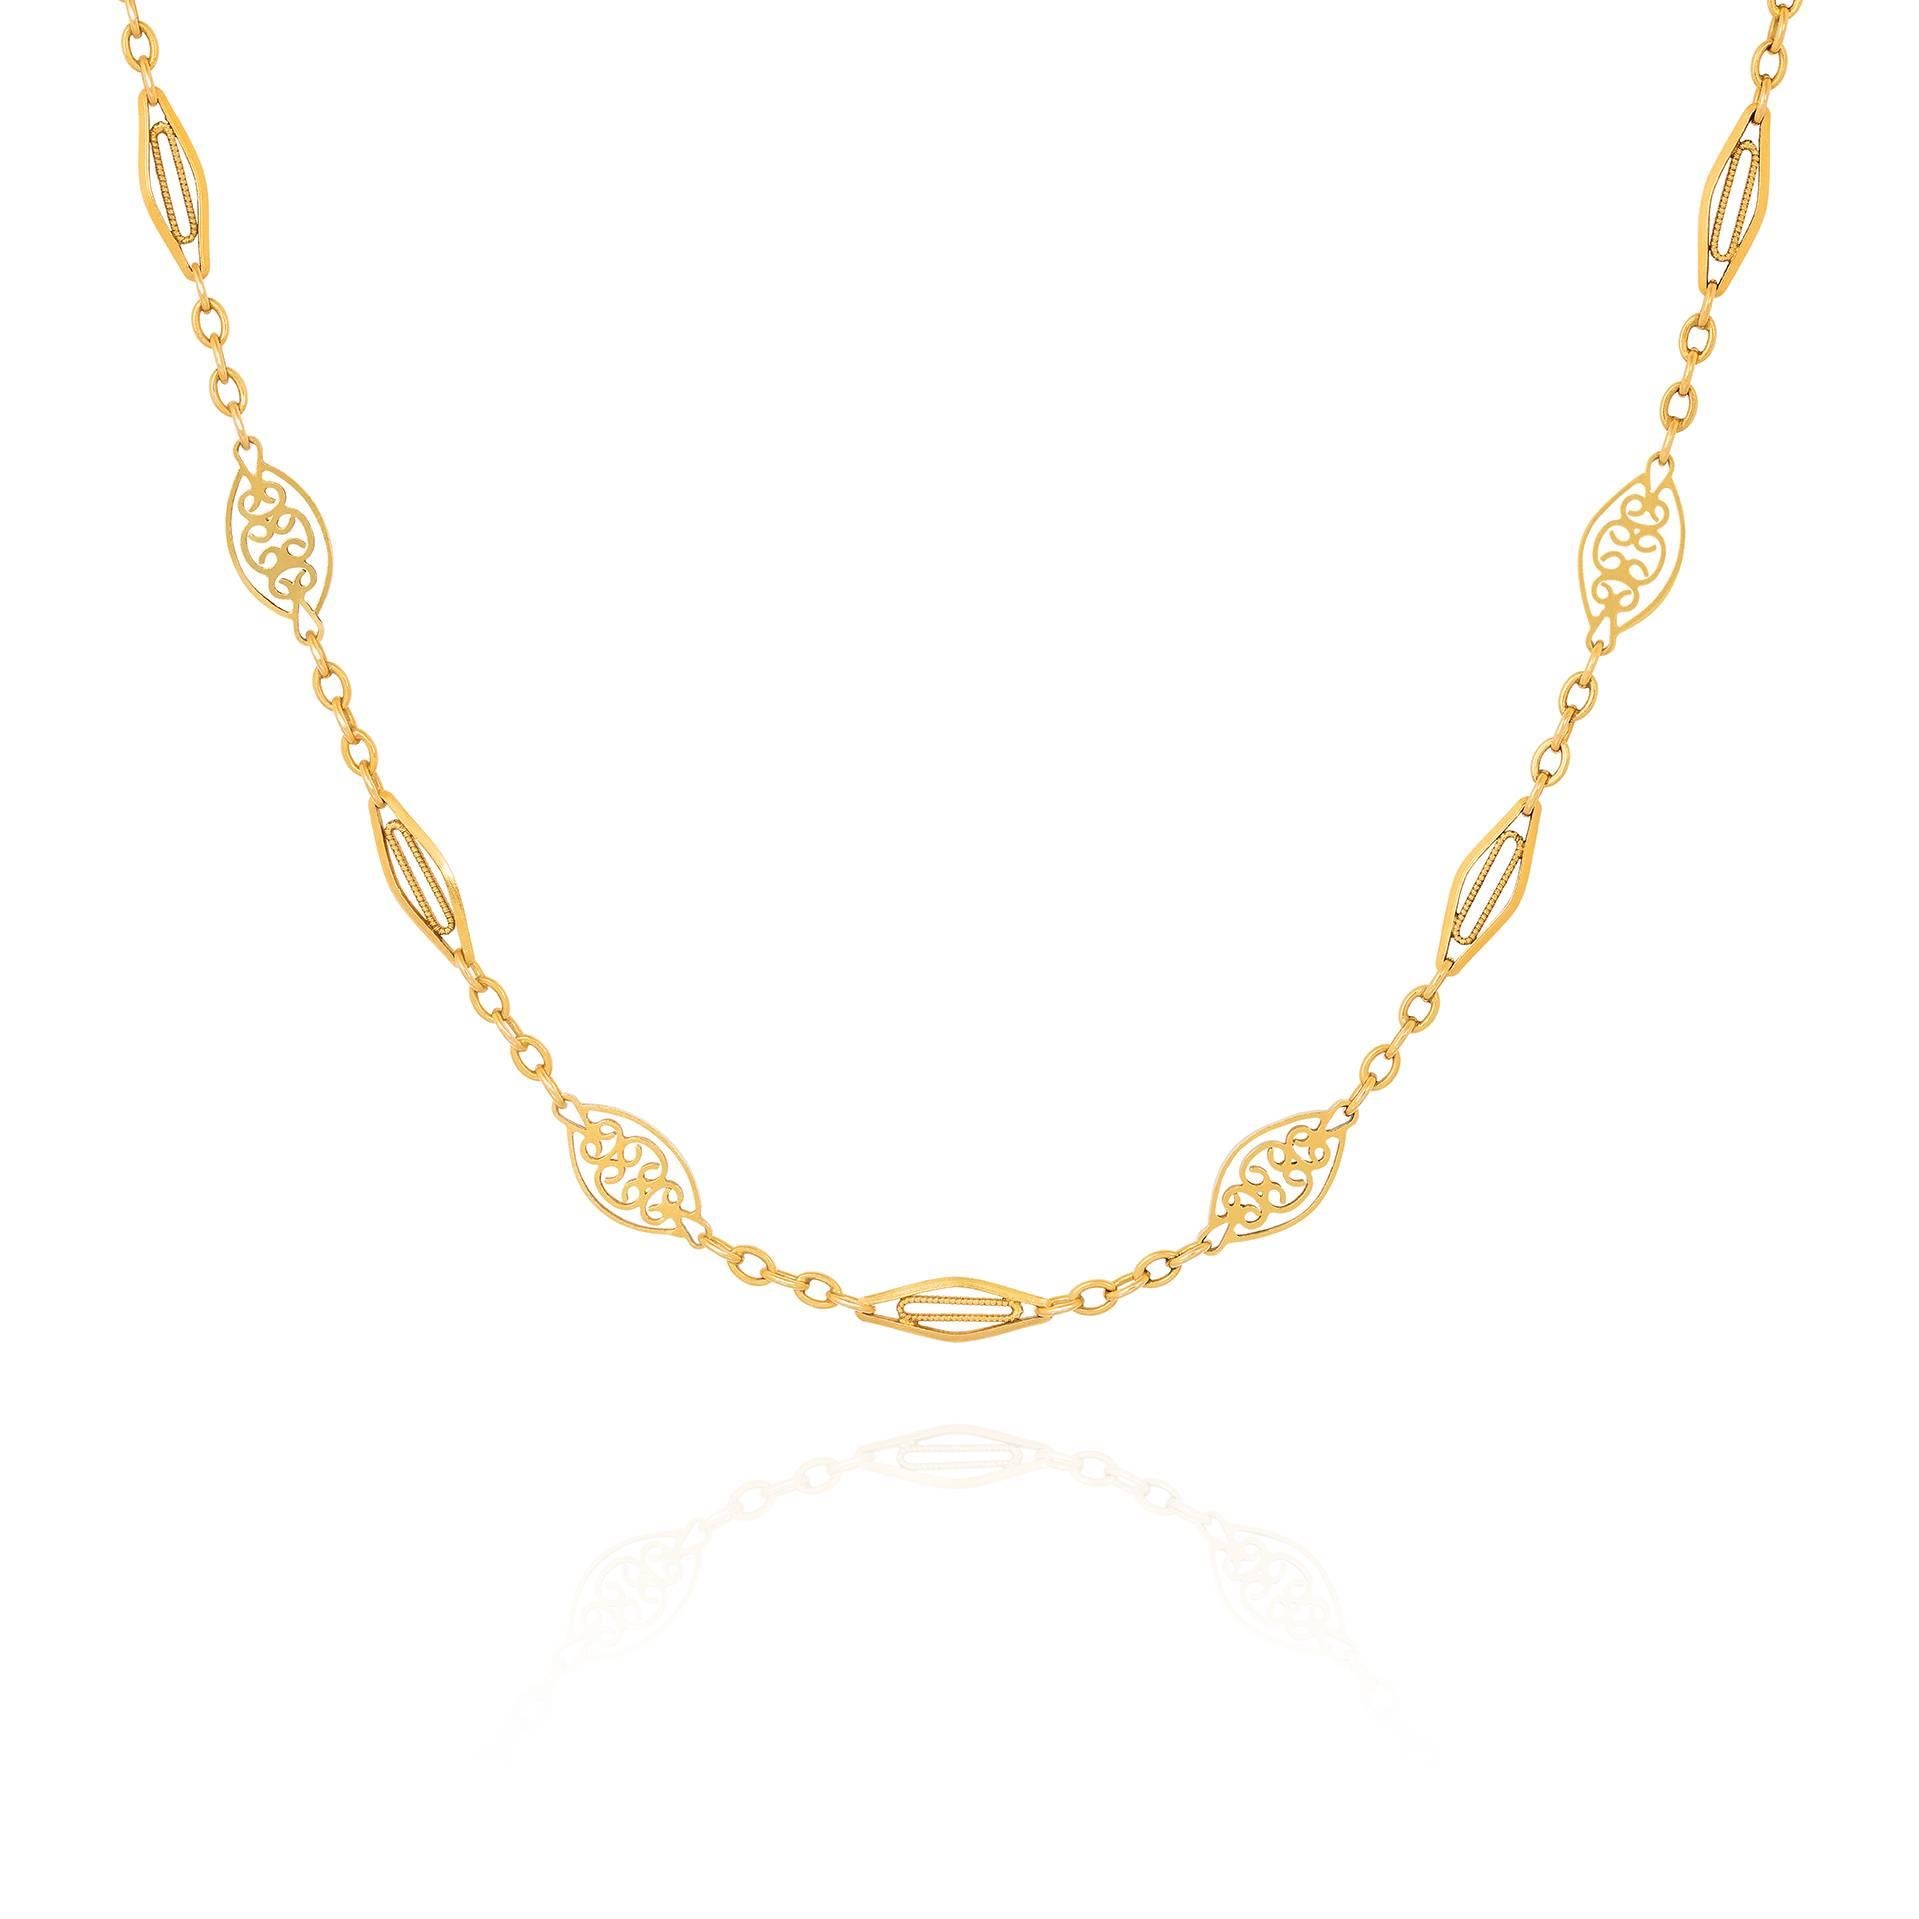 An antique French gold chain, composed of alternating articulated openwork milgrain marquise and lozenge shaped links. Stamped with French assay marks for 18K gold, and makers mark. Measuring 150cm. Circa 1900.